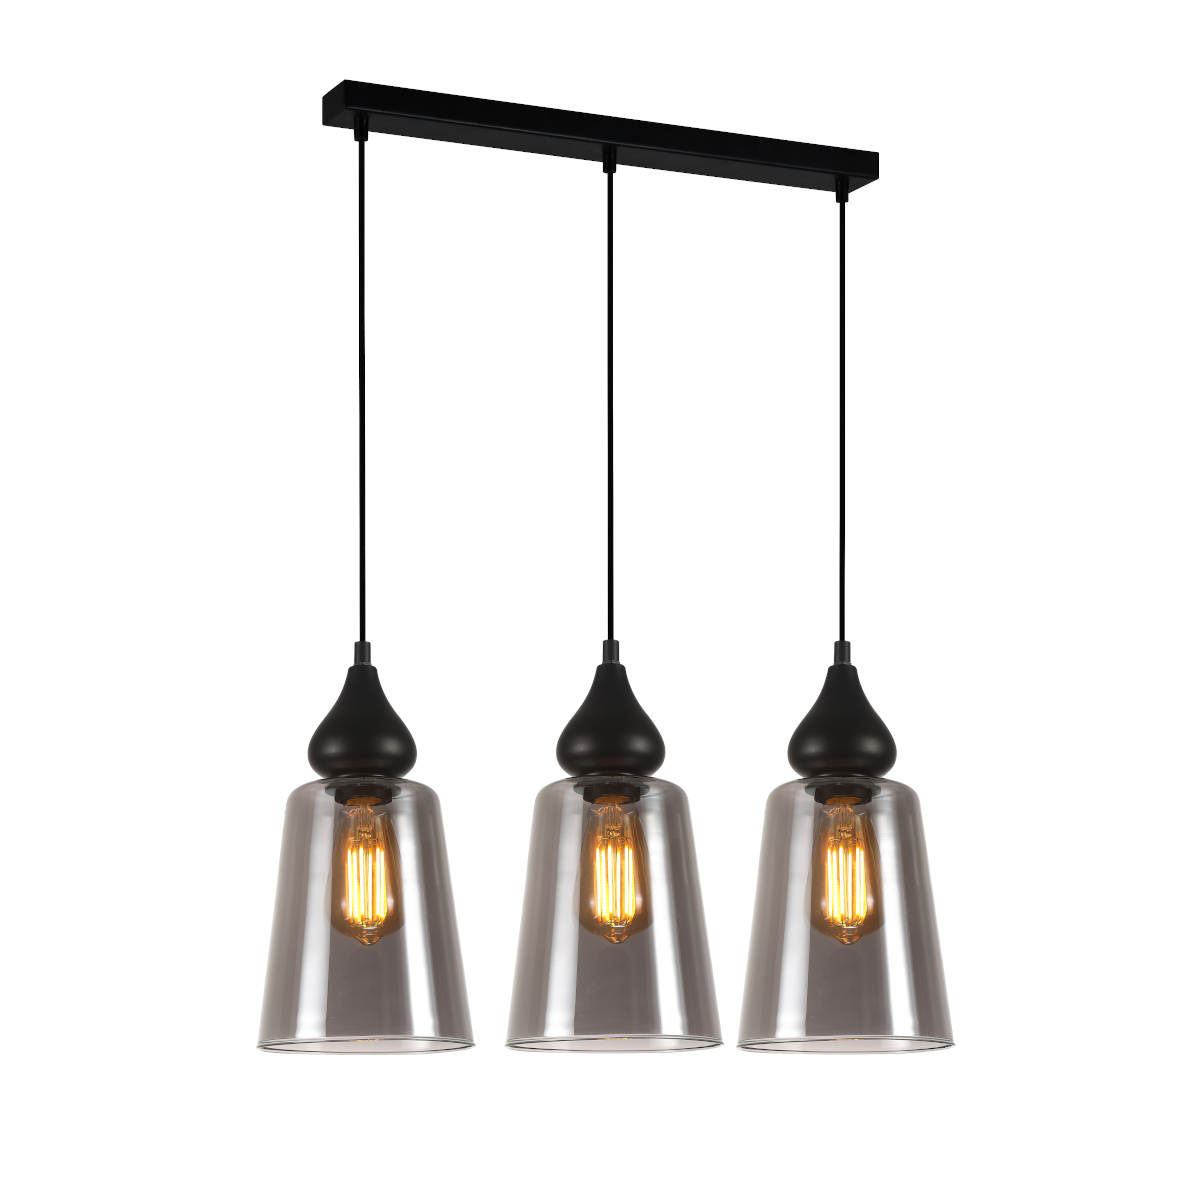 Product image of Jerez 3 Smoke Glass Pendants with Linear Base with lights on